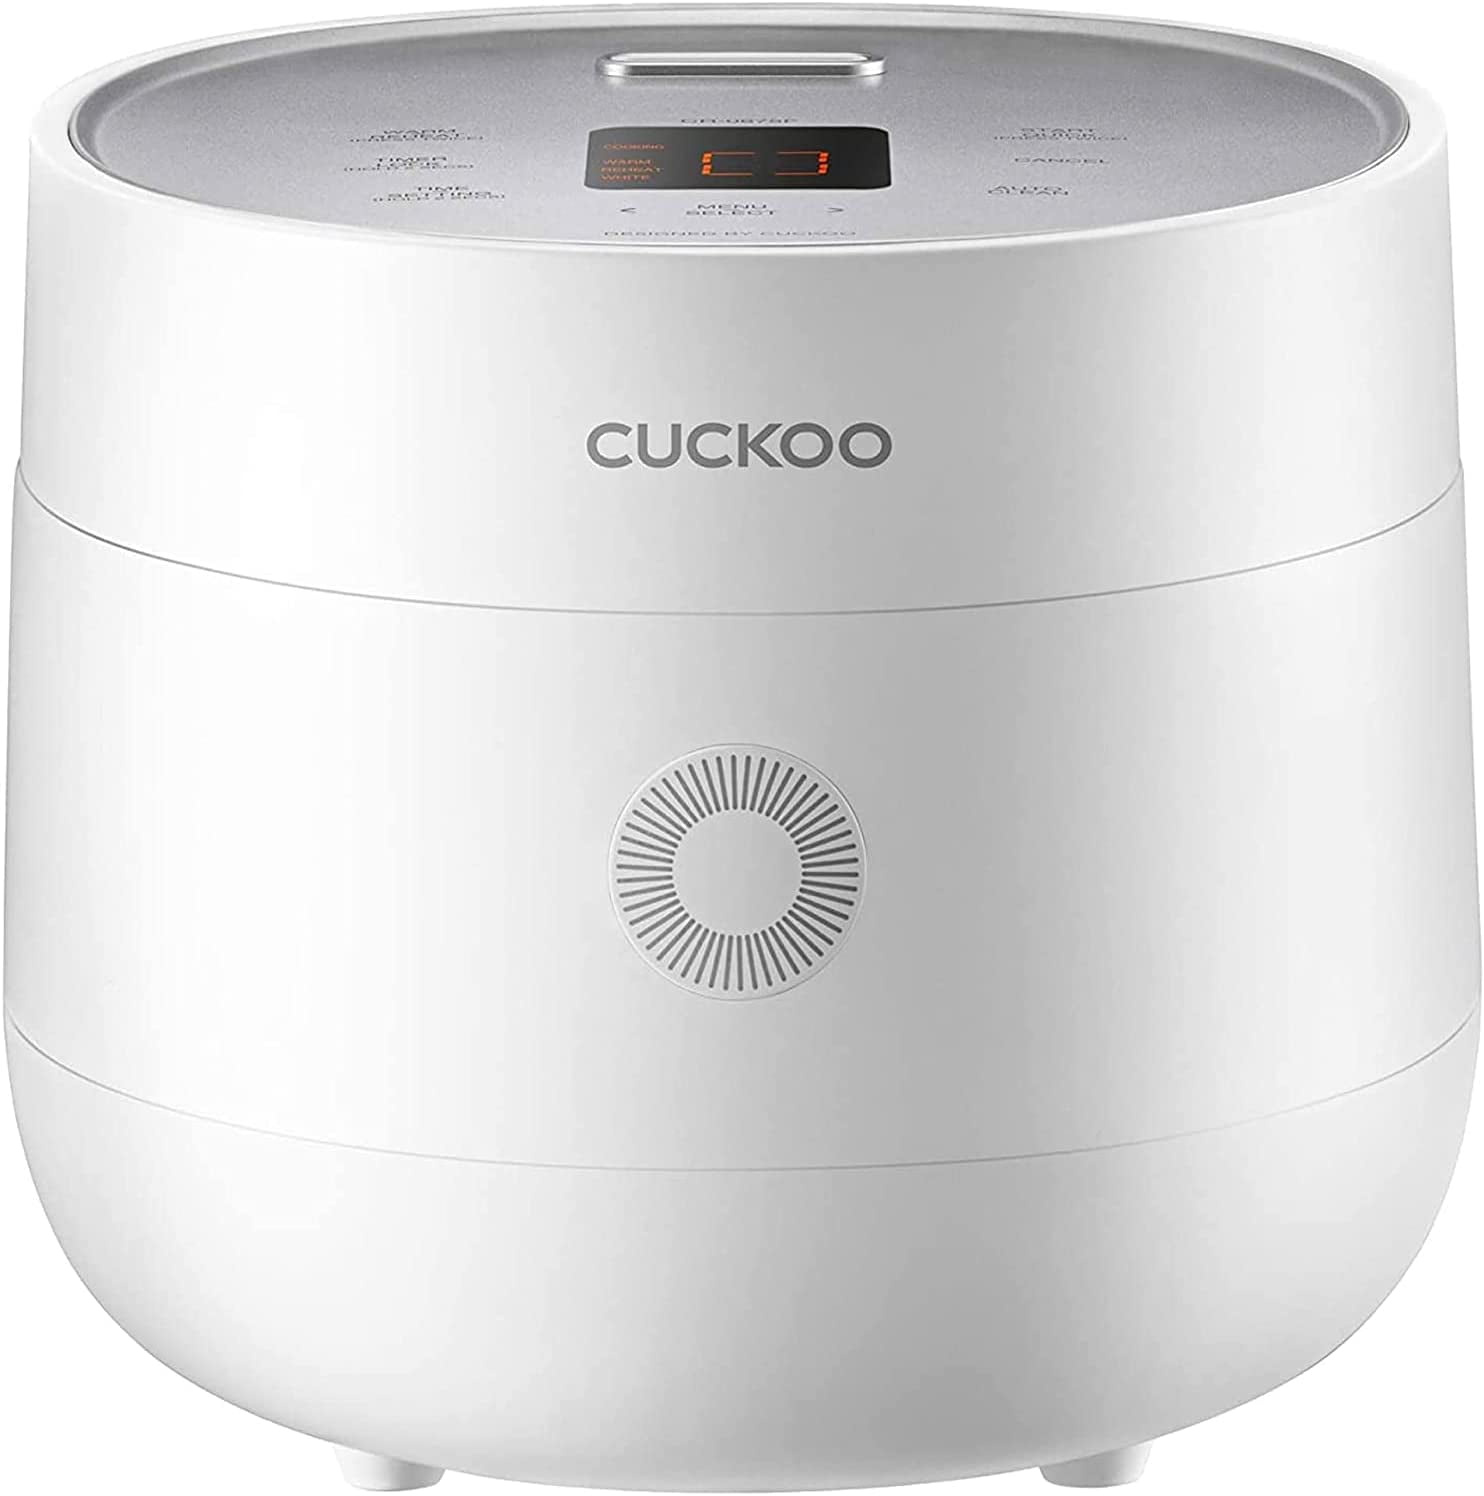 Cuckoo 3 Cup Uncooked Micom Rice Cooker 10 Menu Options Oatmeal